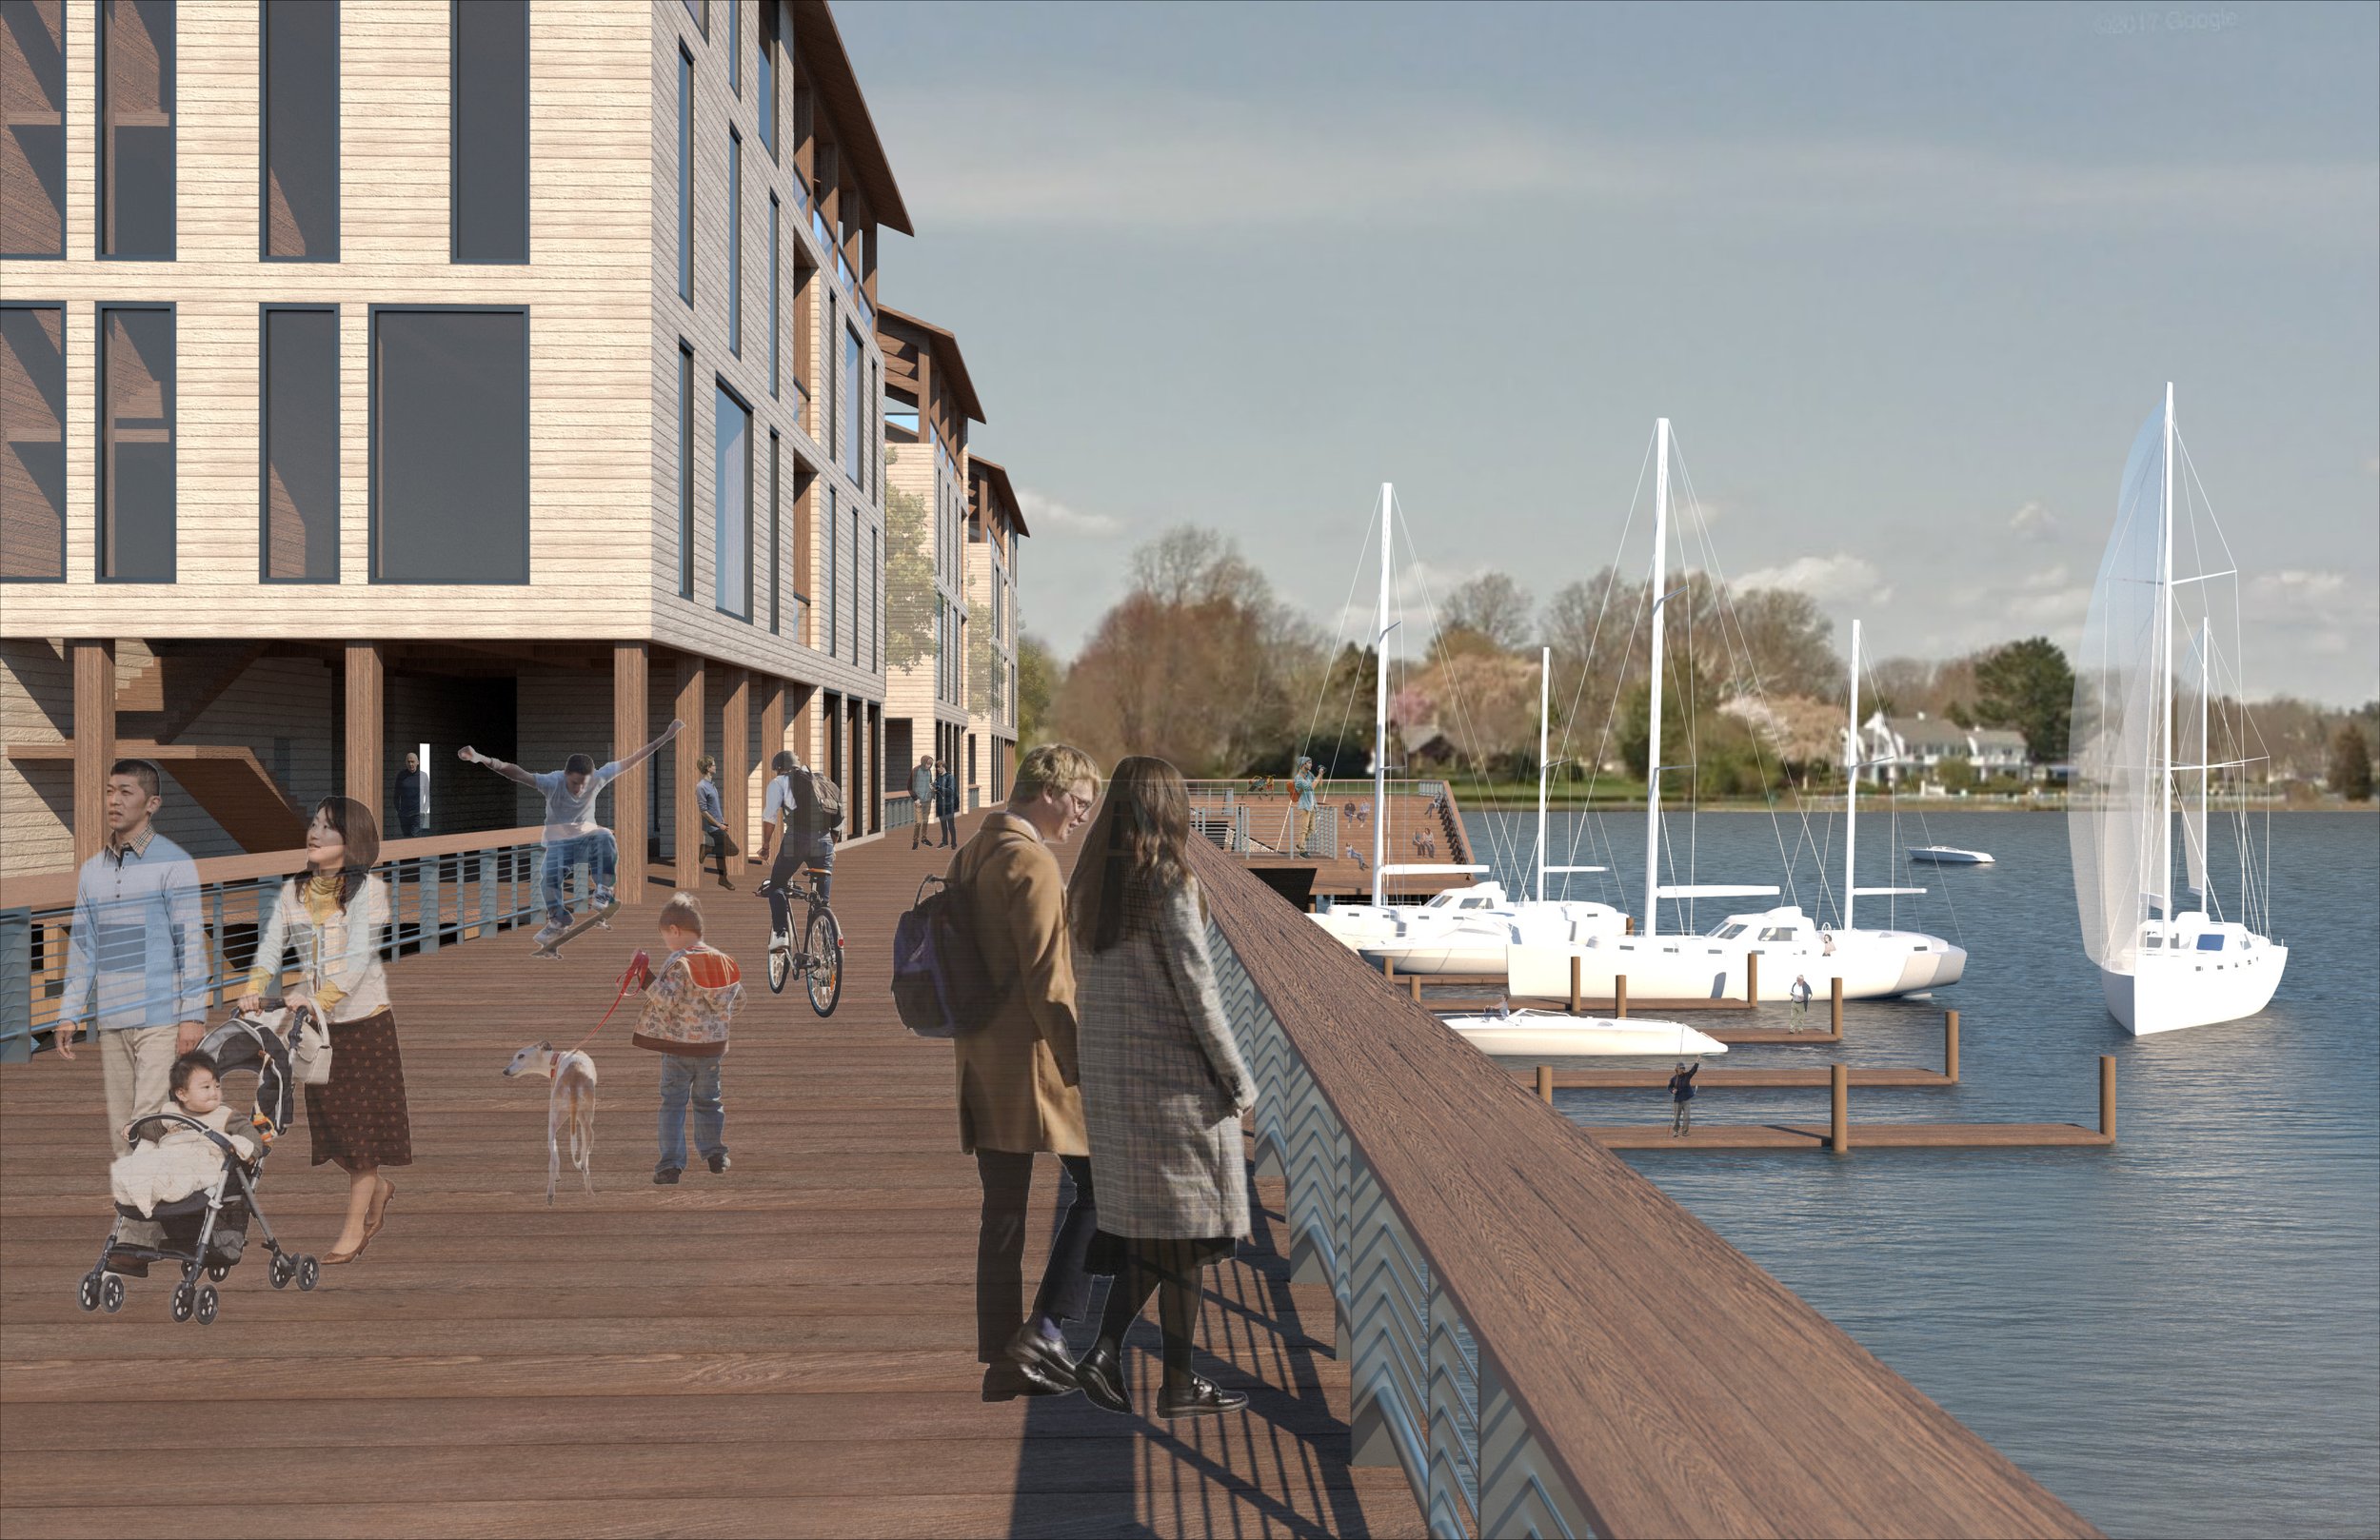 Warren Waterfront rendering by Syracuse School of Architecture student Khoi Nguyen Chu.